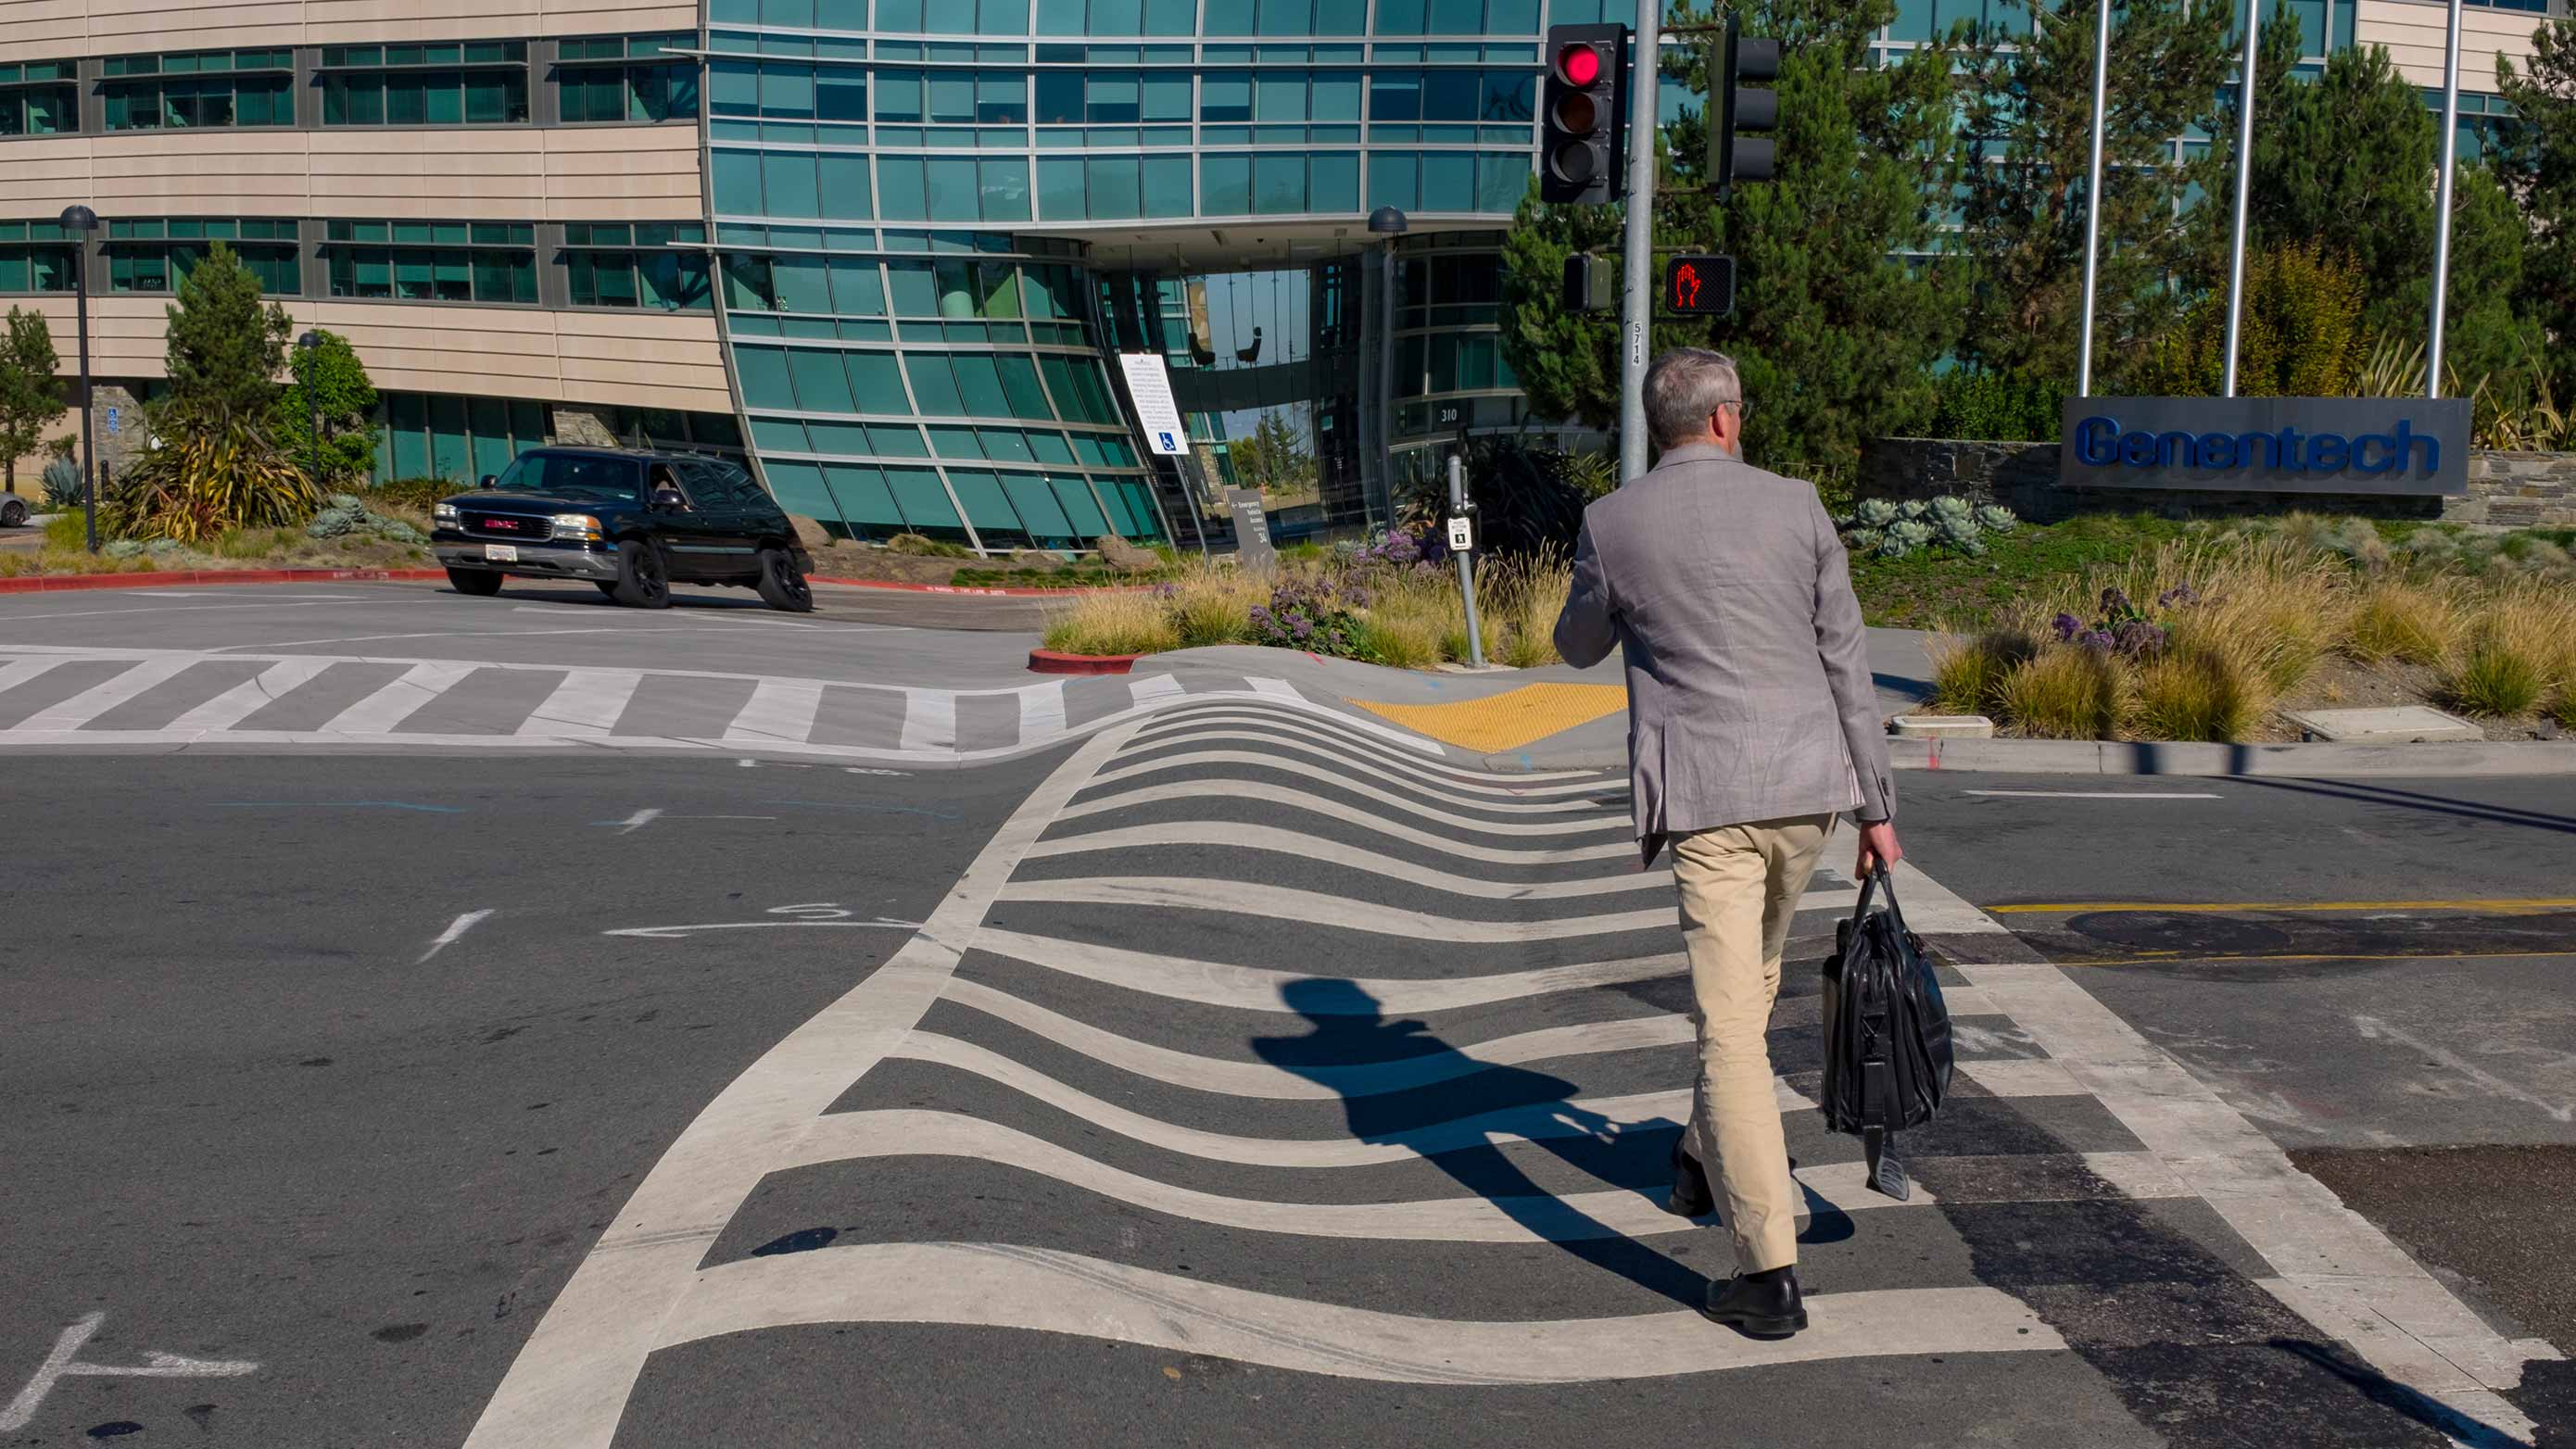 Lines that should appear straight, like the lines of a crosswalk, may look wavy or warped.